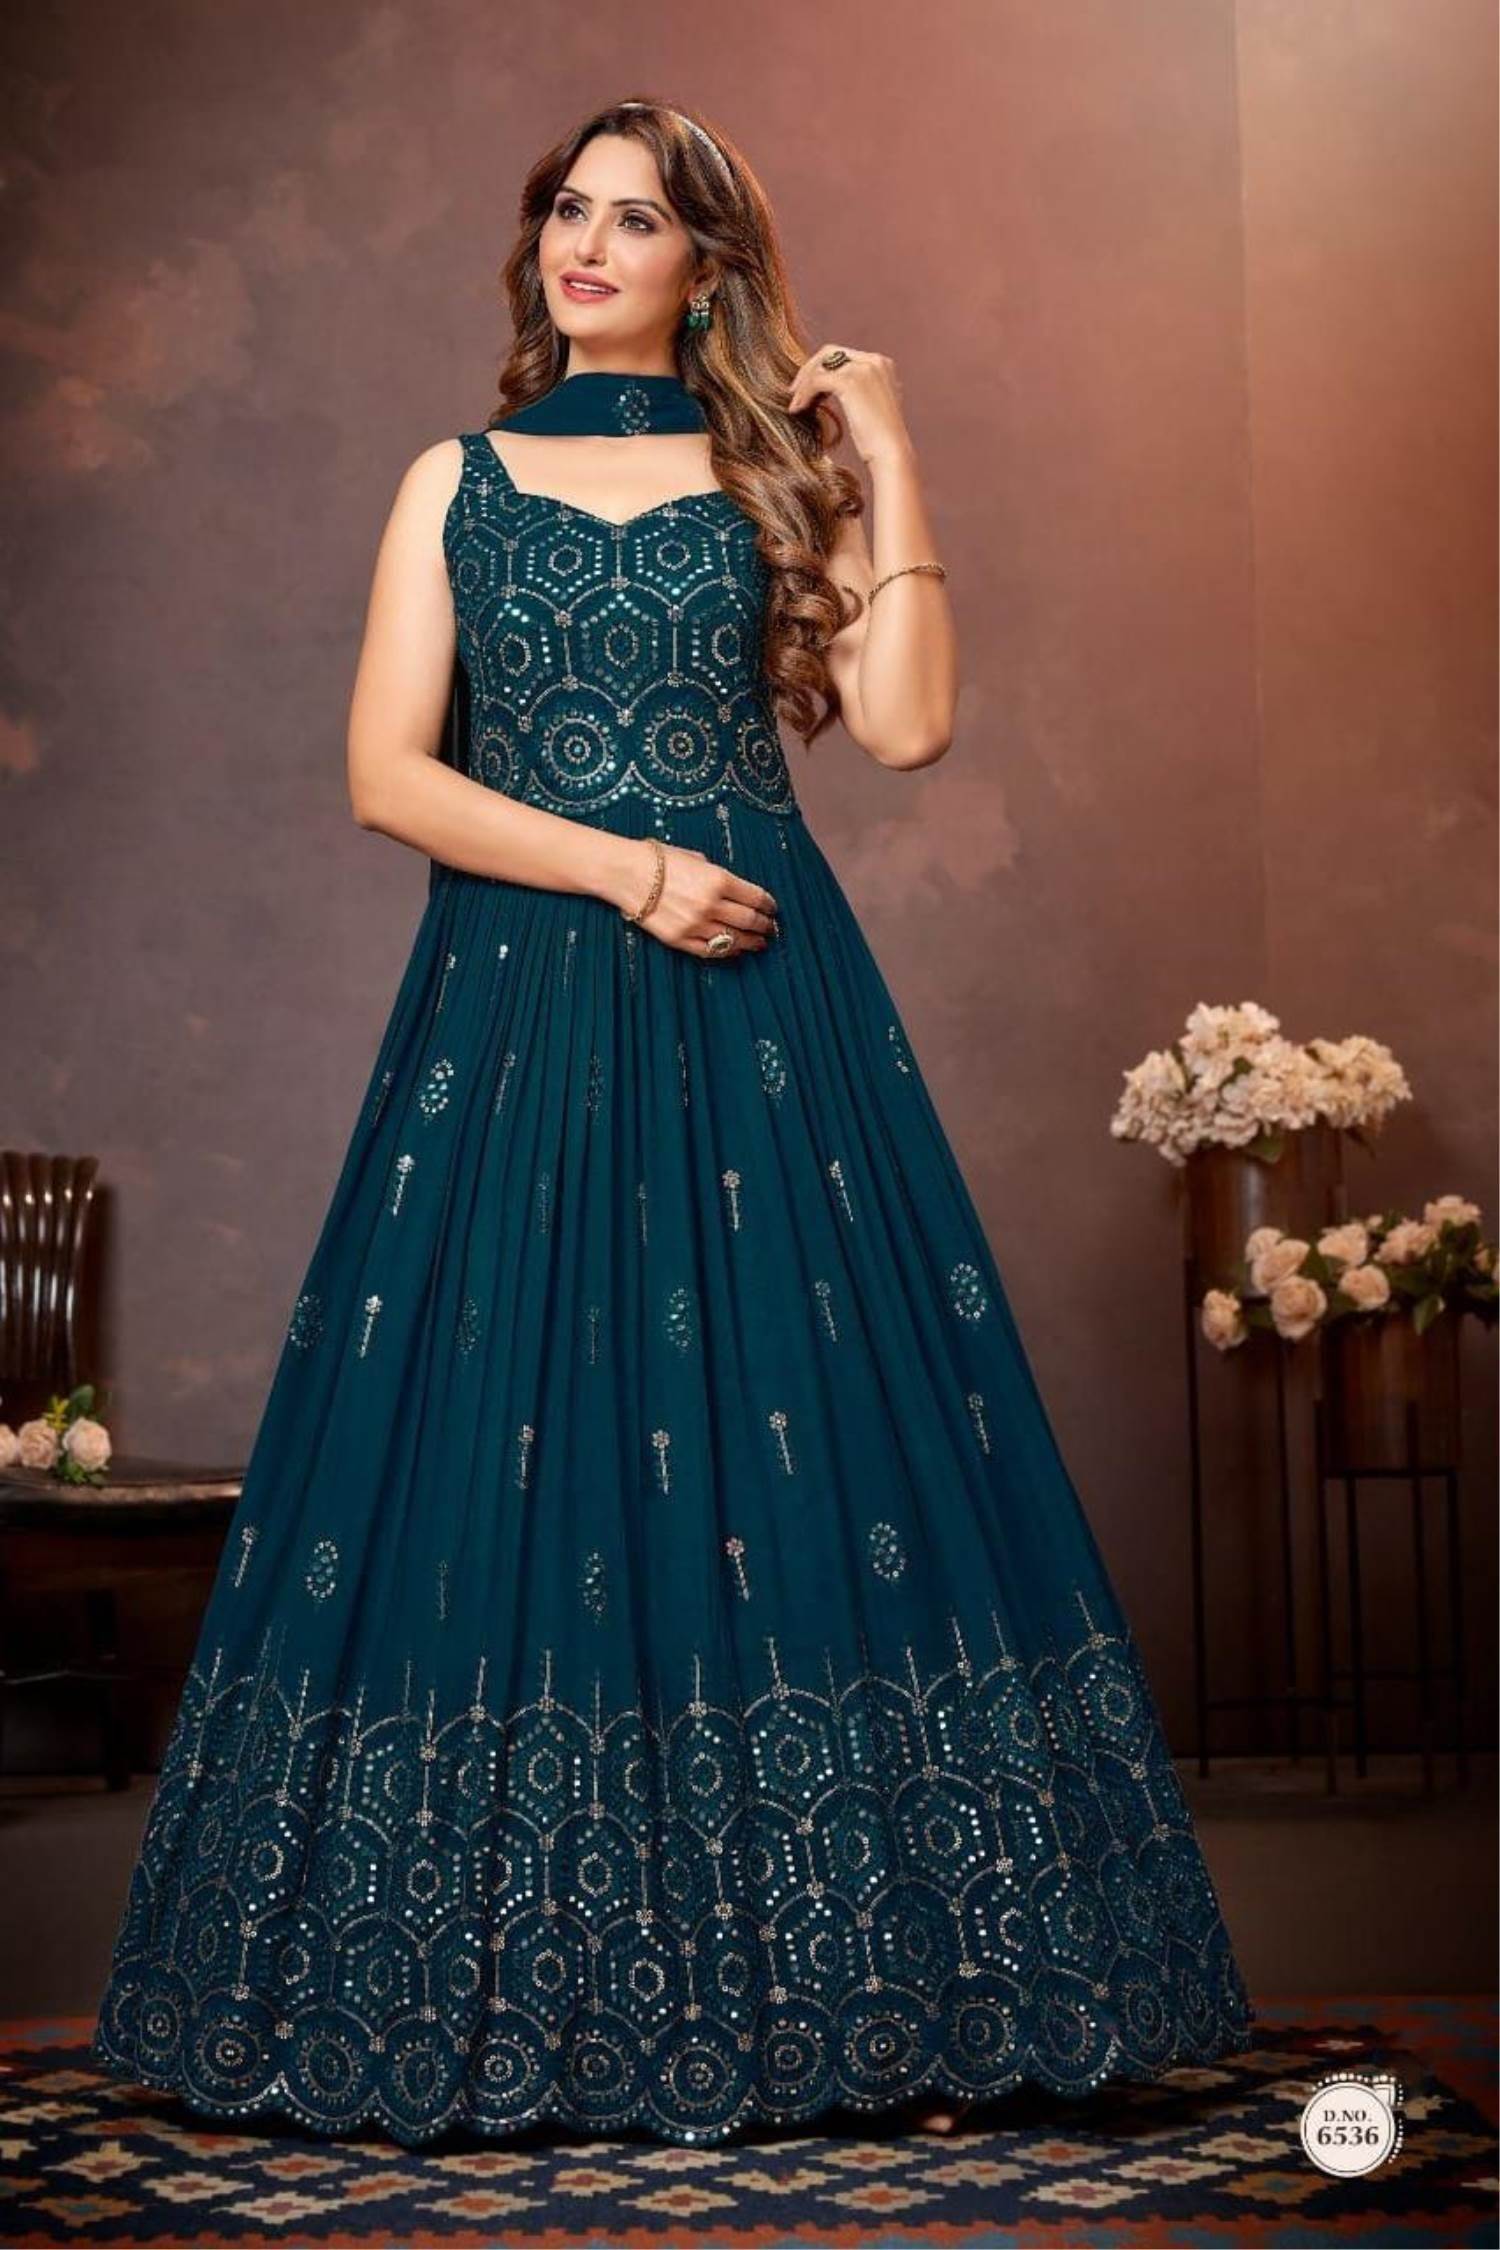 Royal Blue color Gown | Party wear dresses, Gowns, Western gowns